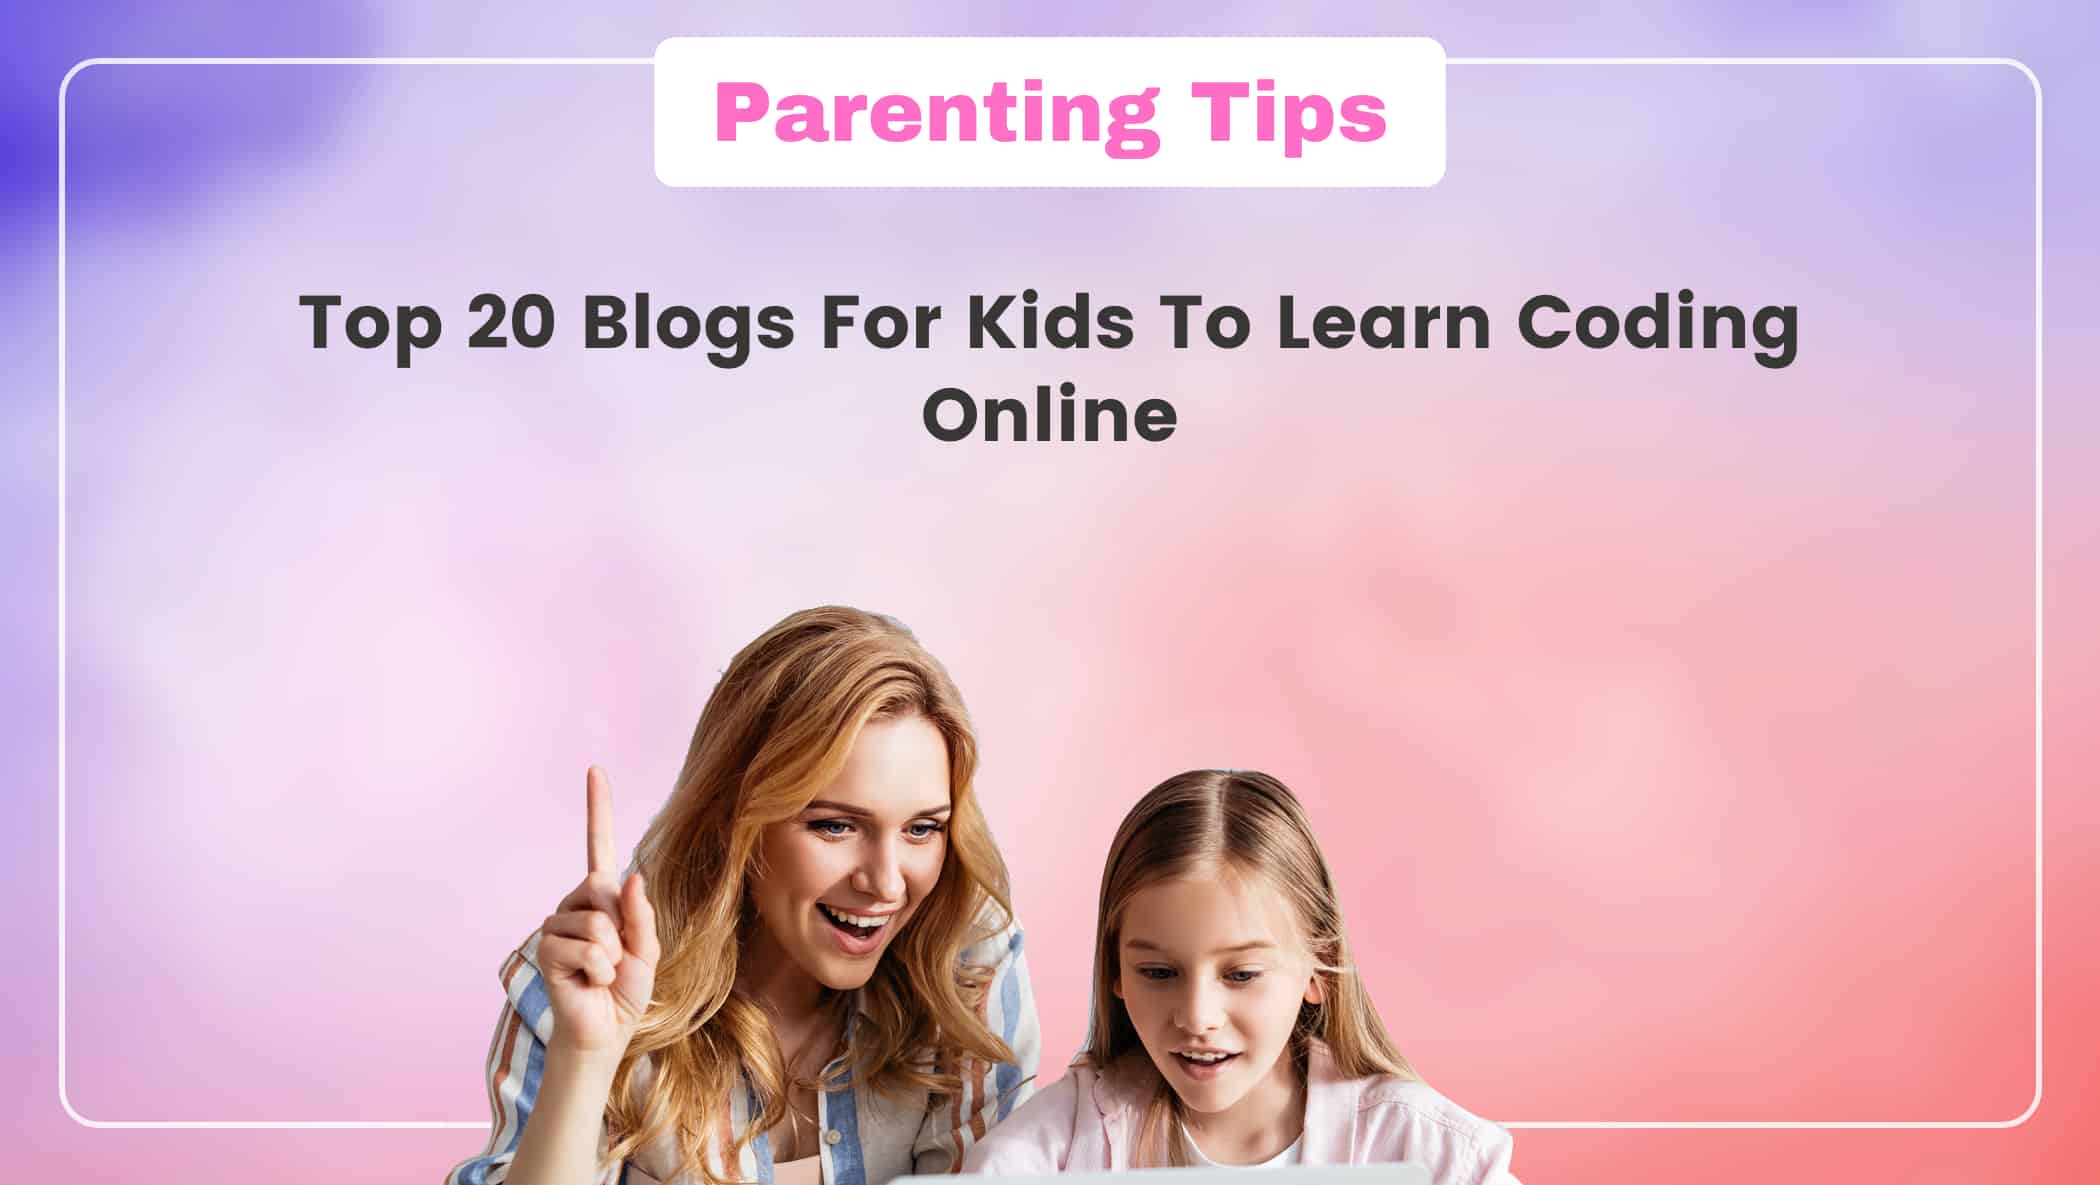 Top 20 Blogs For Kids To Learn Coding Online Image